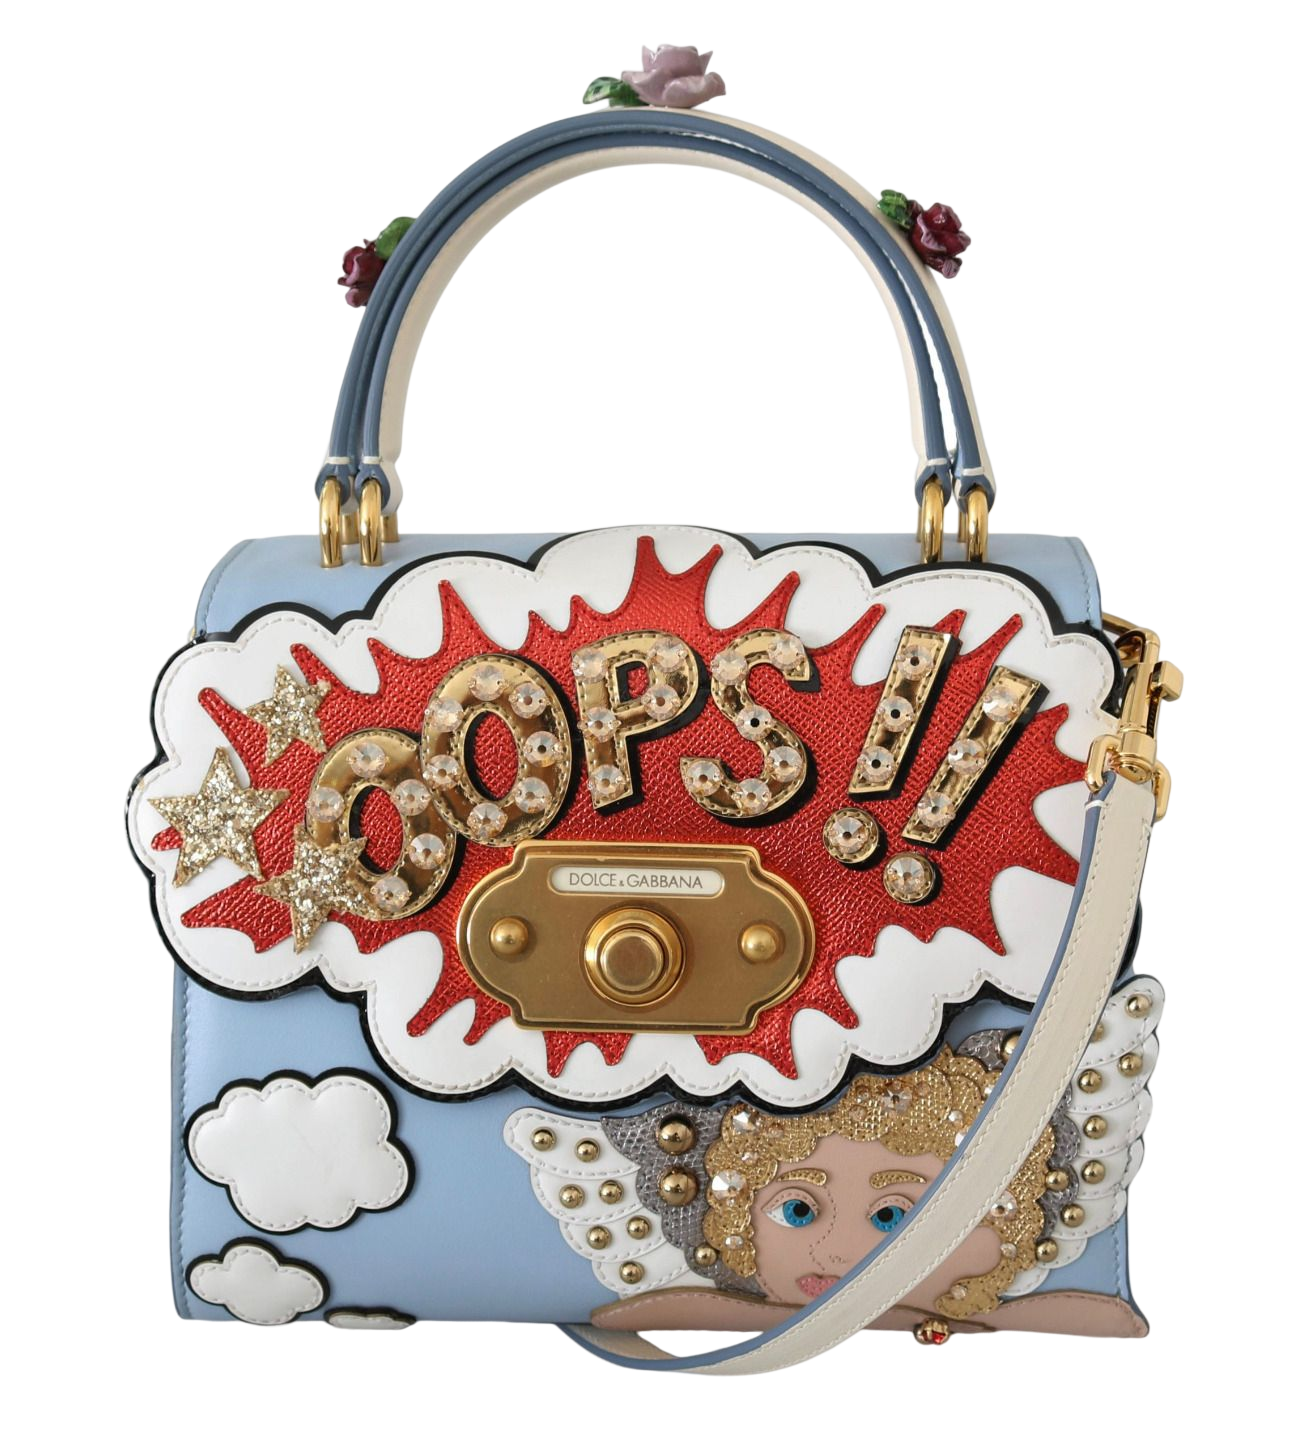 Dolce and Gabbana Limited Edition Bag